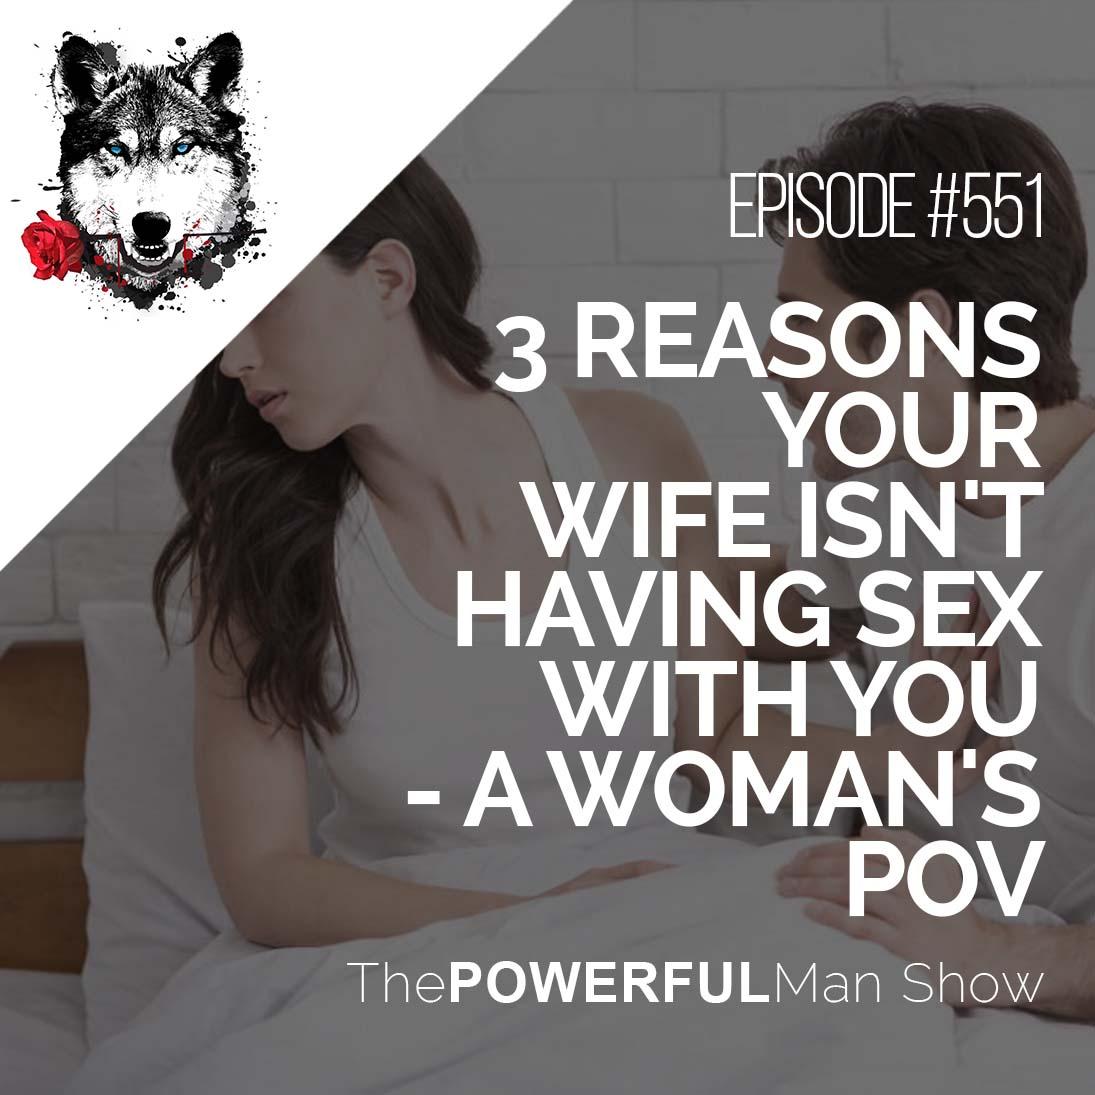 3 Reasons Your Wife Isn't Having Sex With You - A Woman's POV